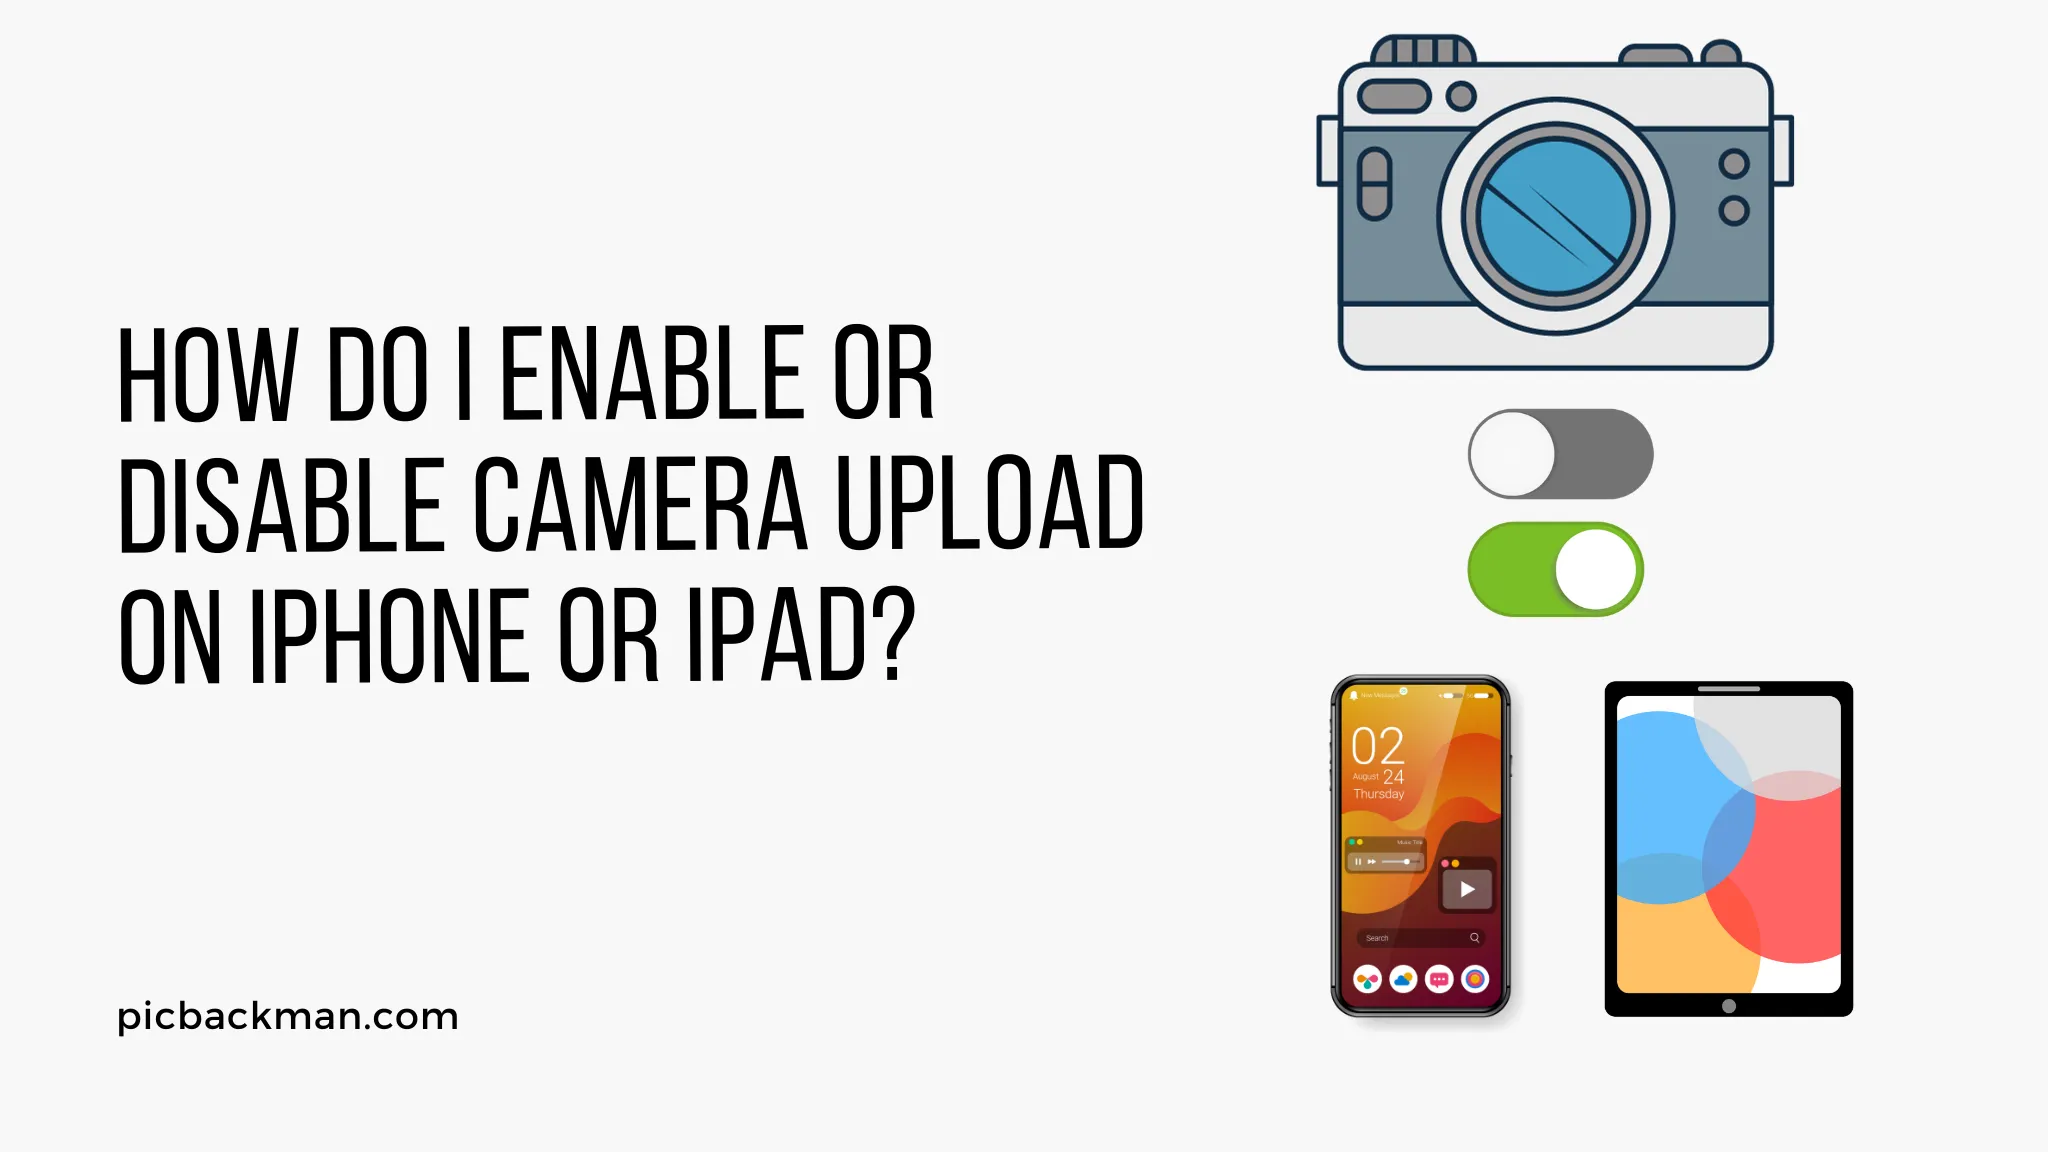 How Do I Enable or Disable Camera Upload on iPhone or iPad